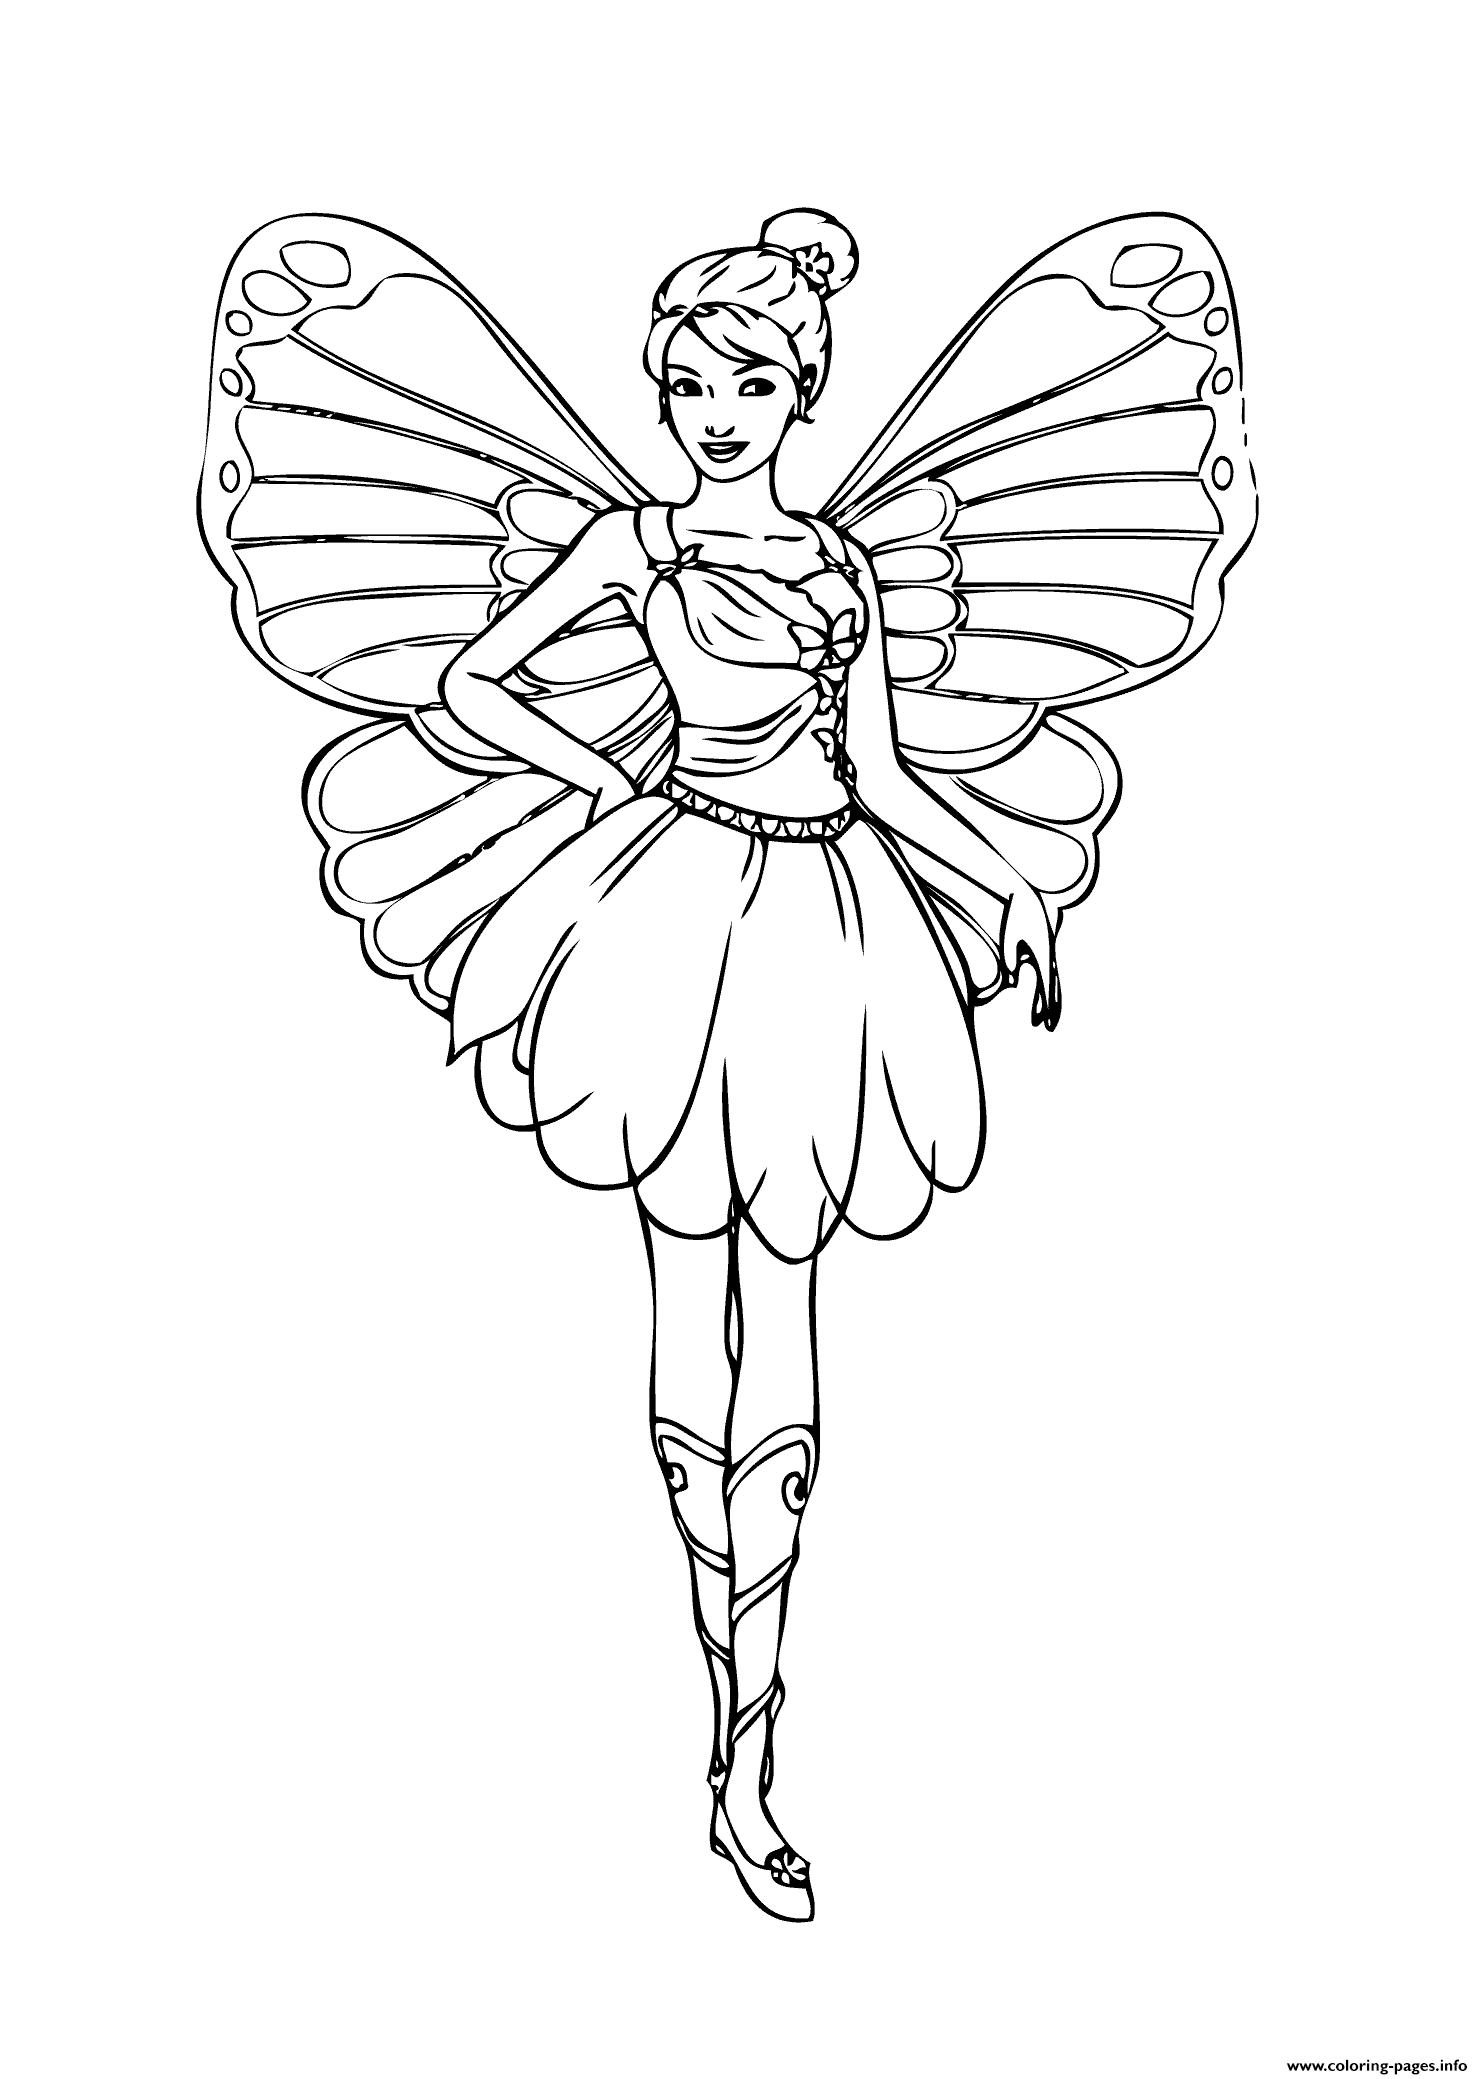 Barbie Fairy Coloring page Printable